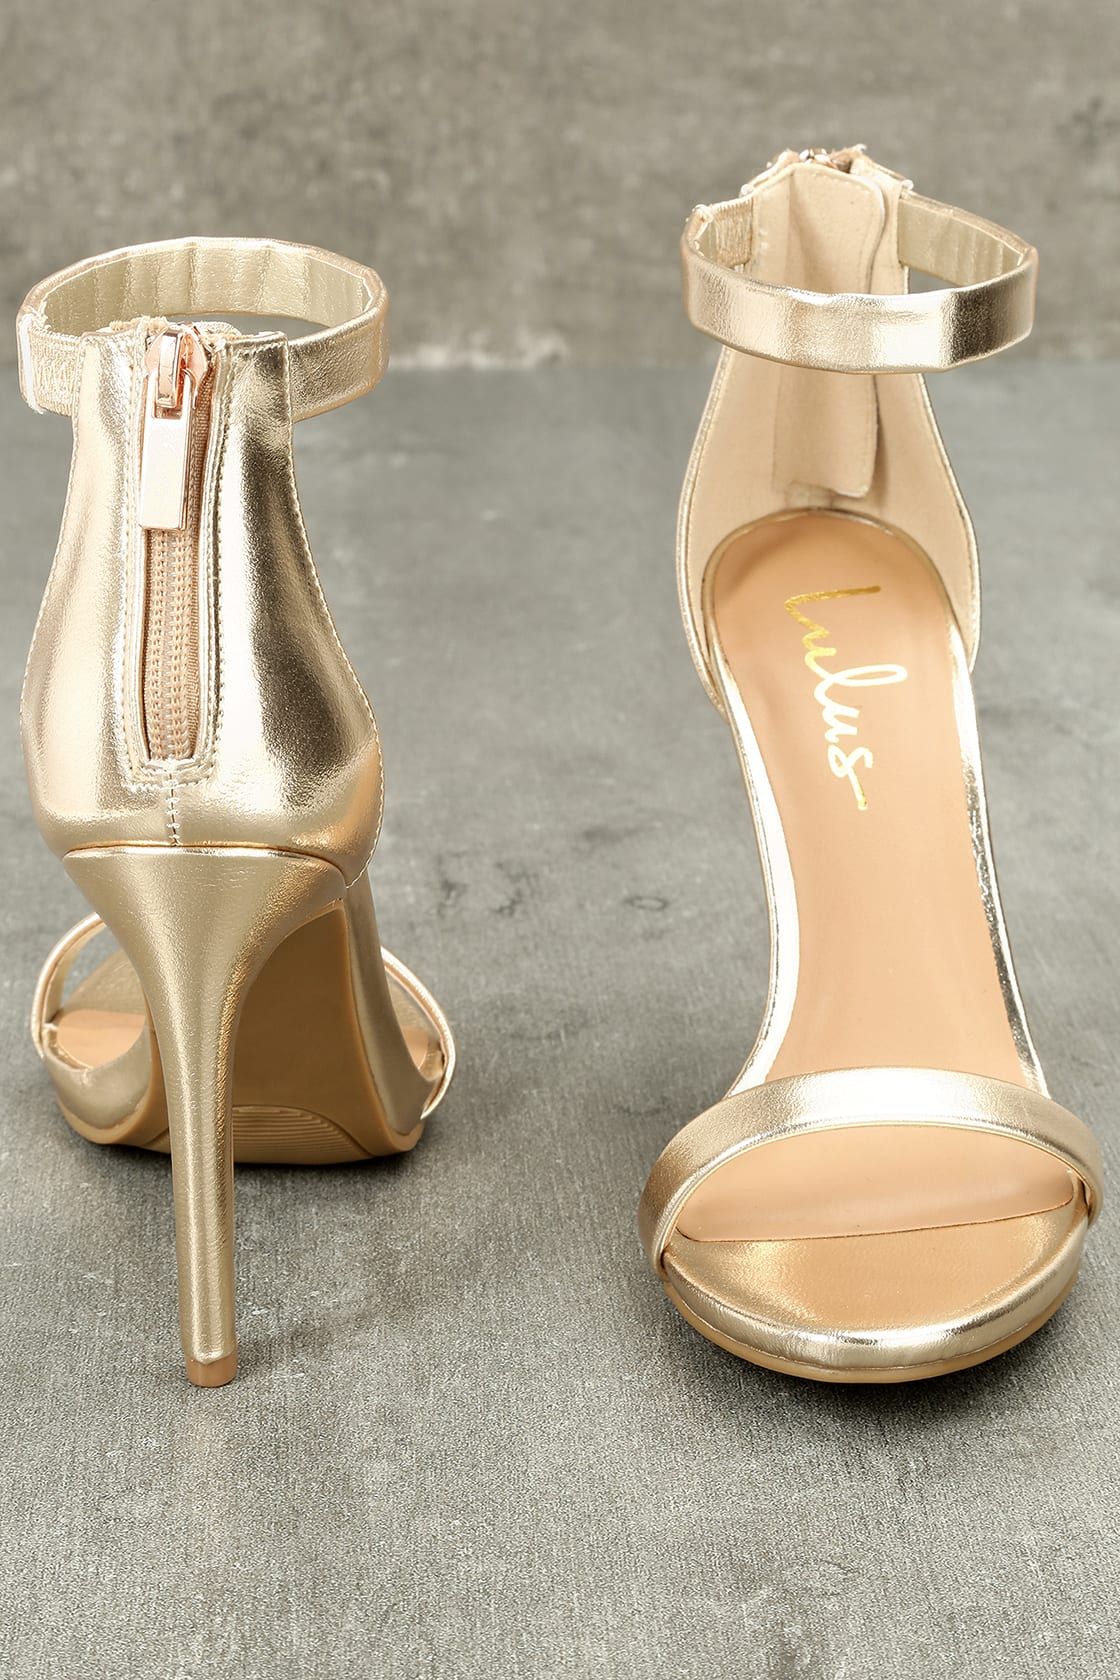 Search the Stars Gold Ankle Strap Heels | Lulus (US)